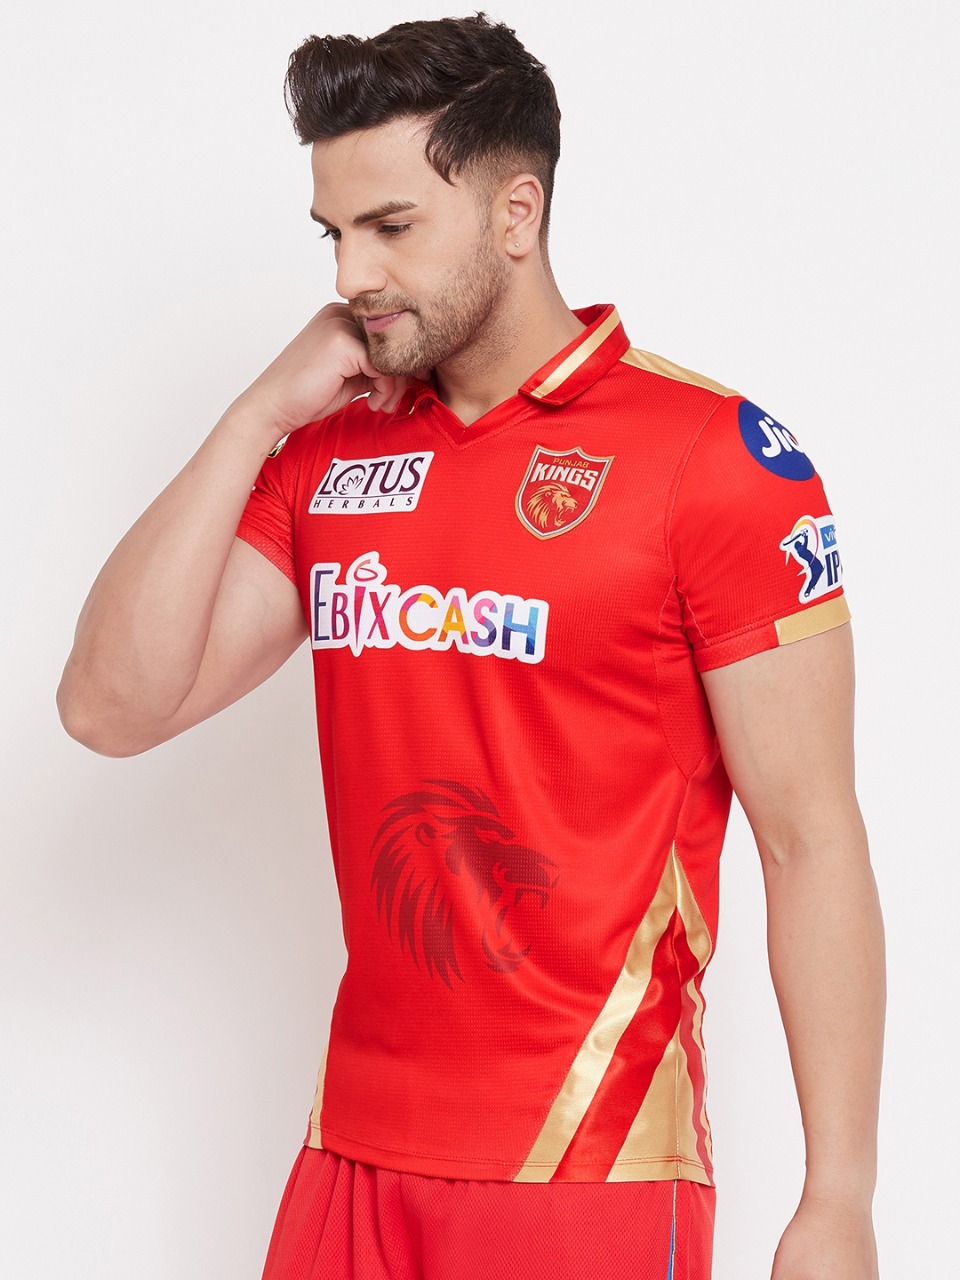 Buy Punjab Kings Player Jersey ED-2021 V-Neck Gold & Red T-Shirts For ...